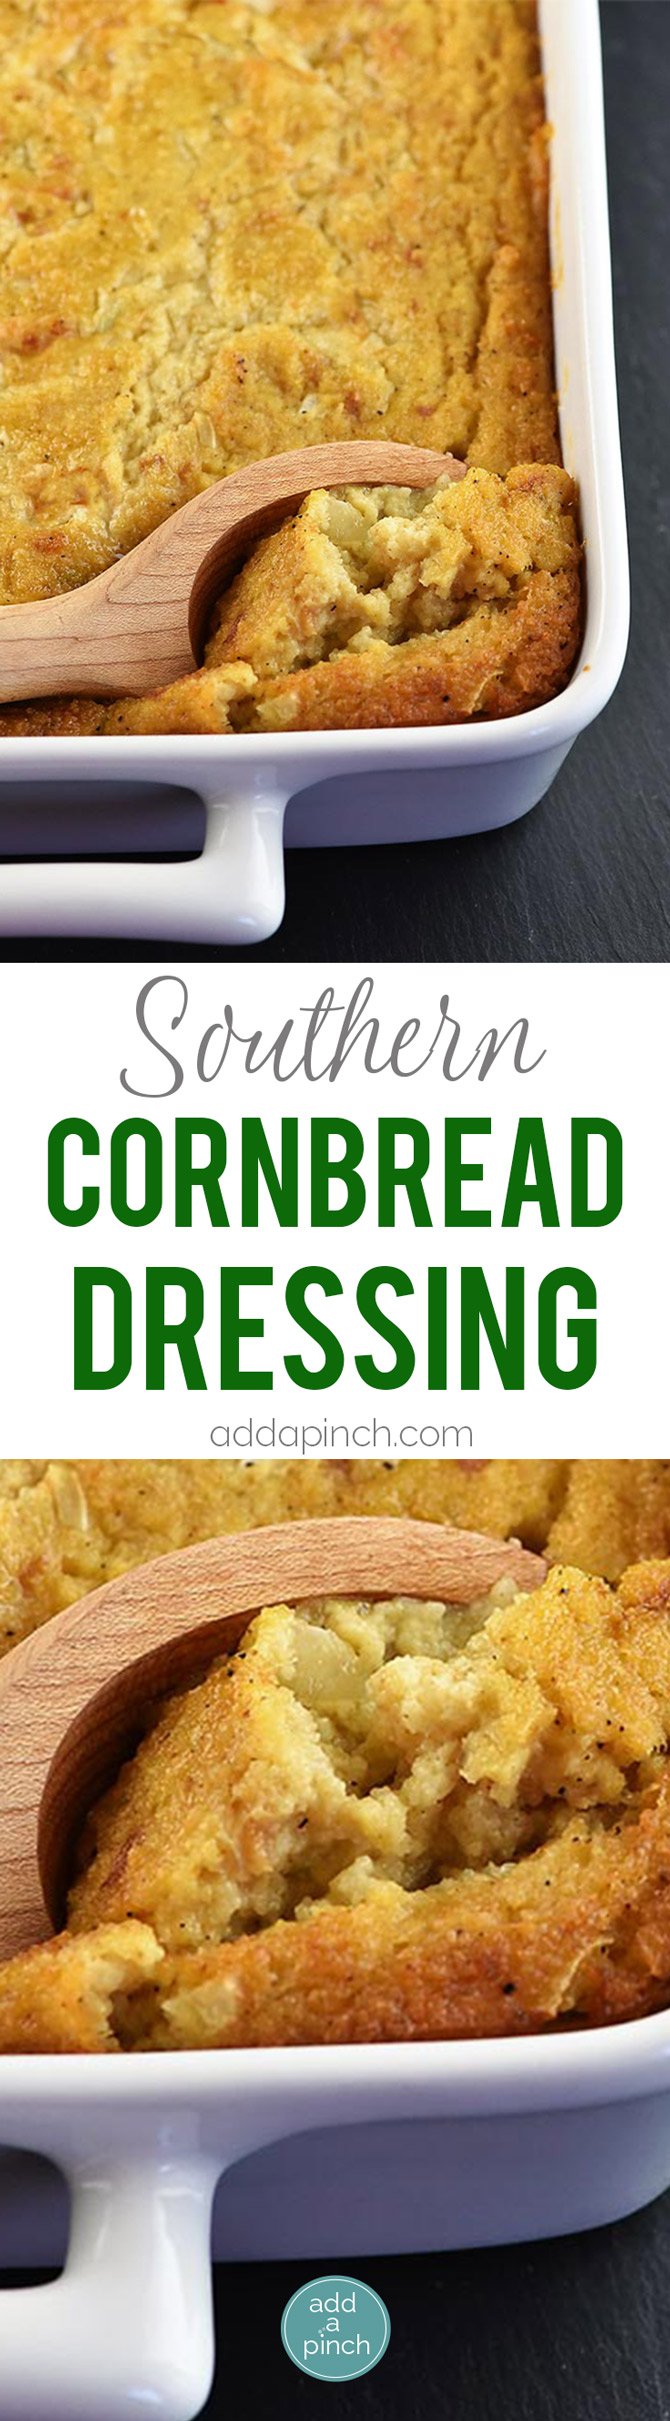 Southern Cornbread Dressing - Southern Cornbread Dressing makes a comforting, classic dish for the holidays! Moist and delicious, cornbread dressing makes the perfect side dish! // addapinch.com